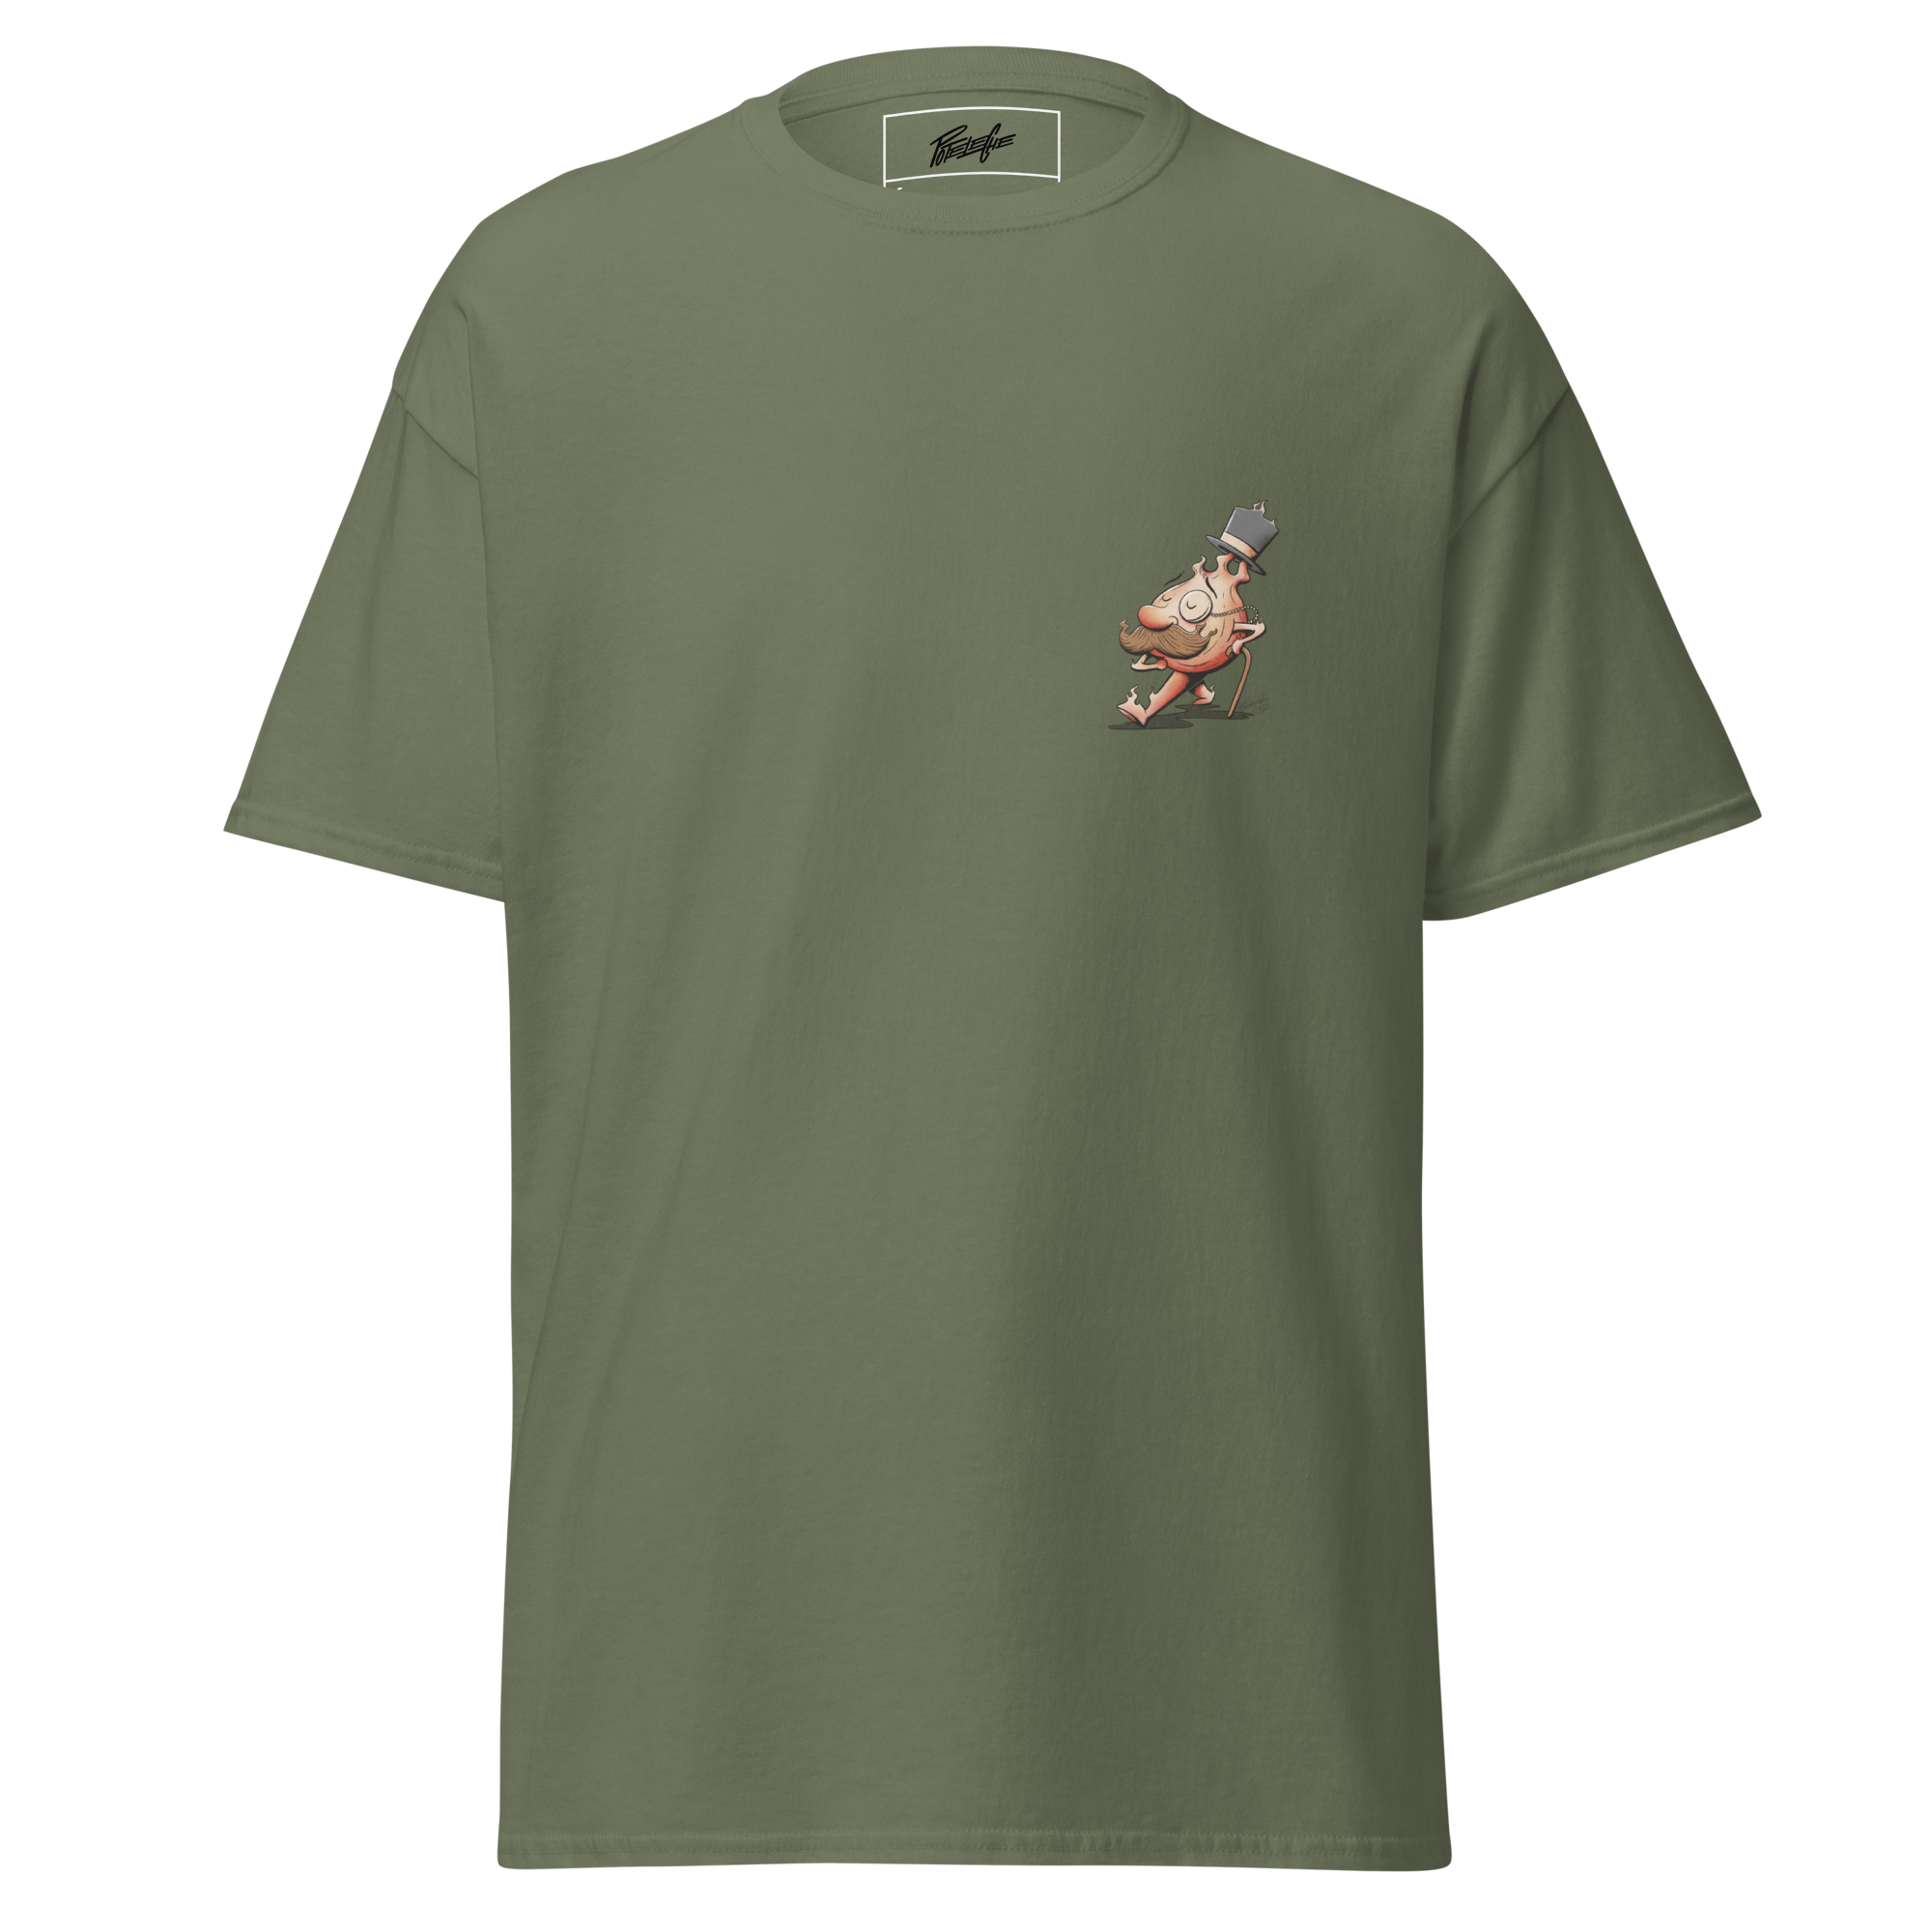 mens-classic-tee-military-green-front-64b83c15e00c0.png